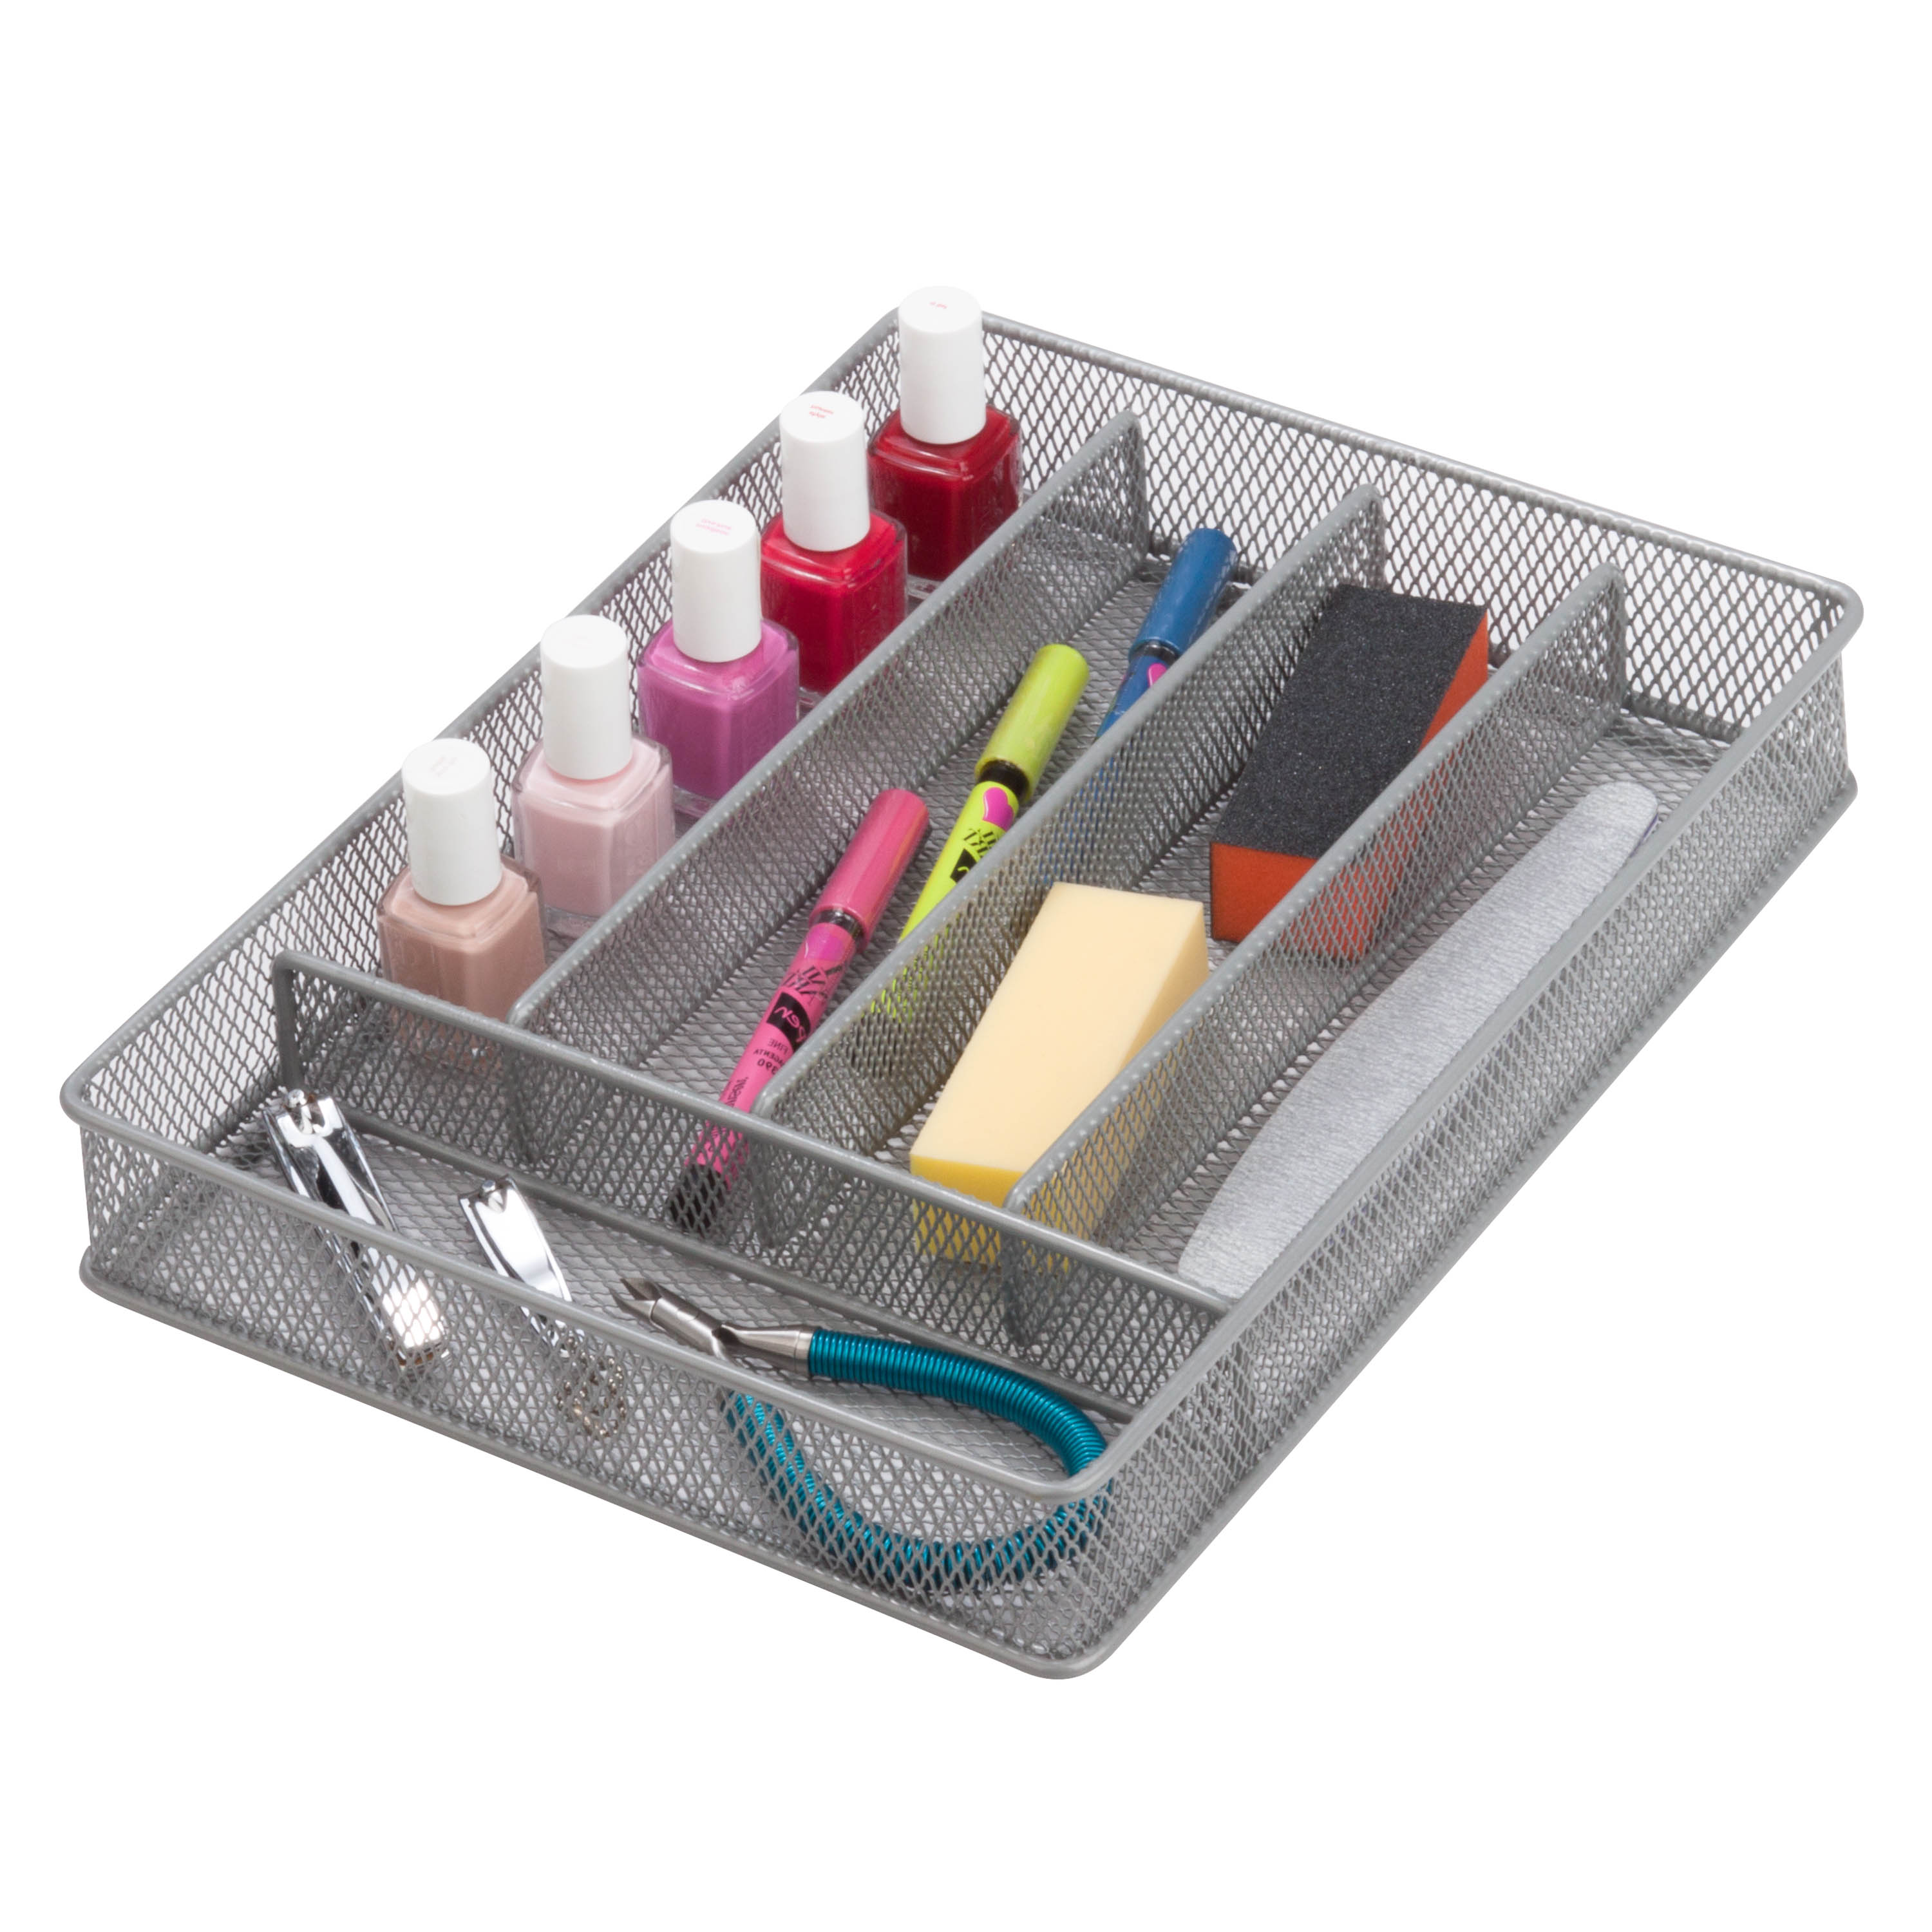 Honey-Can-Do Steel Mesh 12.25” x 9.25” x 2” 5-Compartment Drawer Organizer Tray, Silver - image 5 of 5